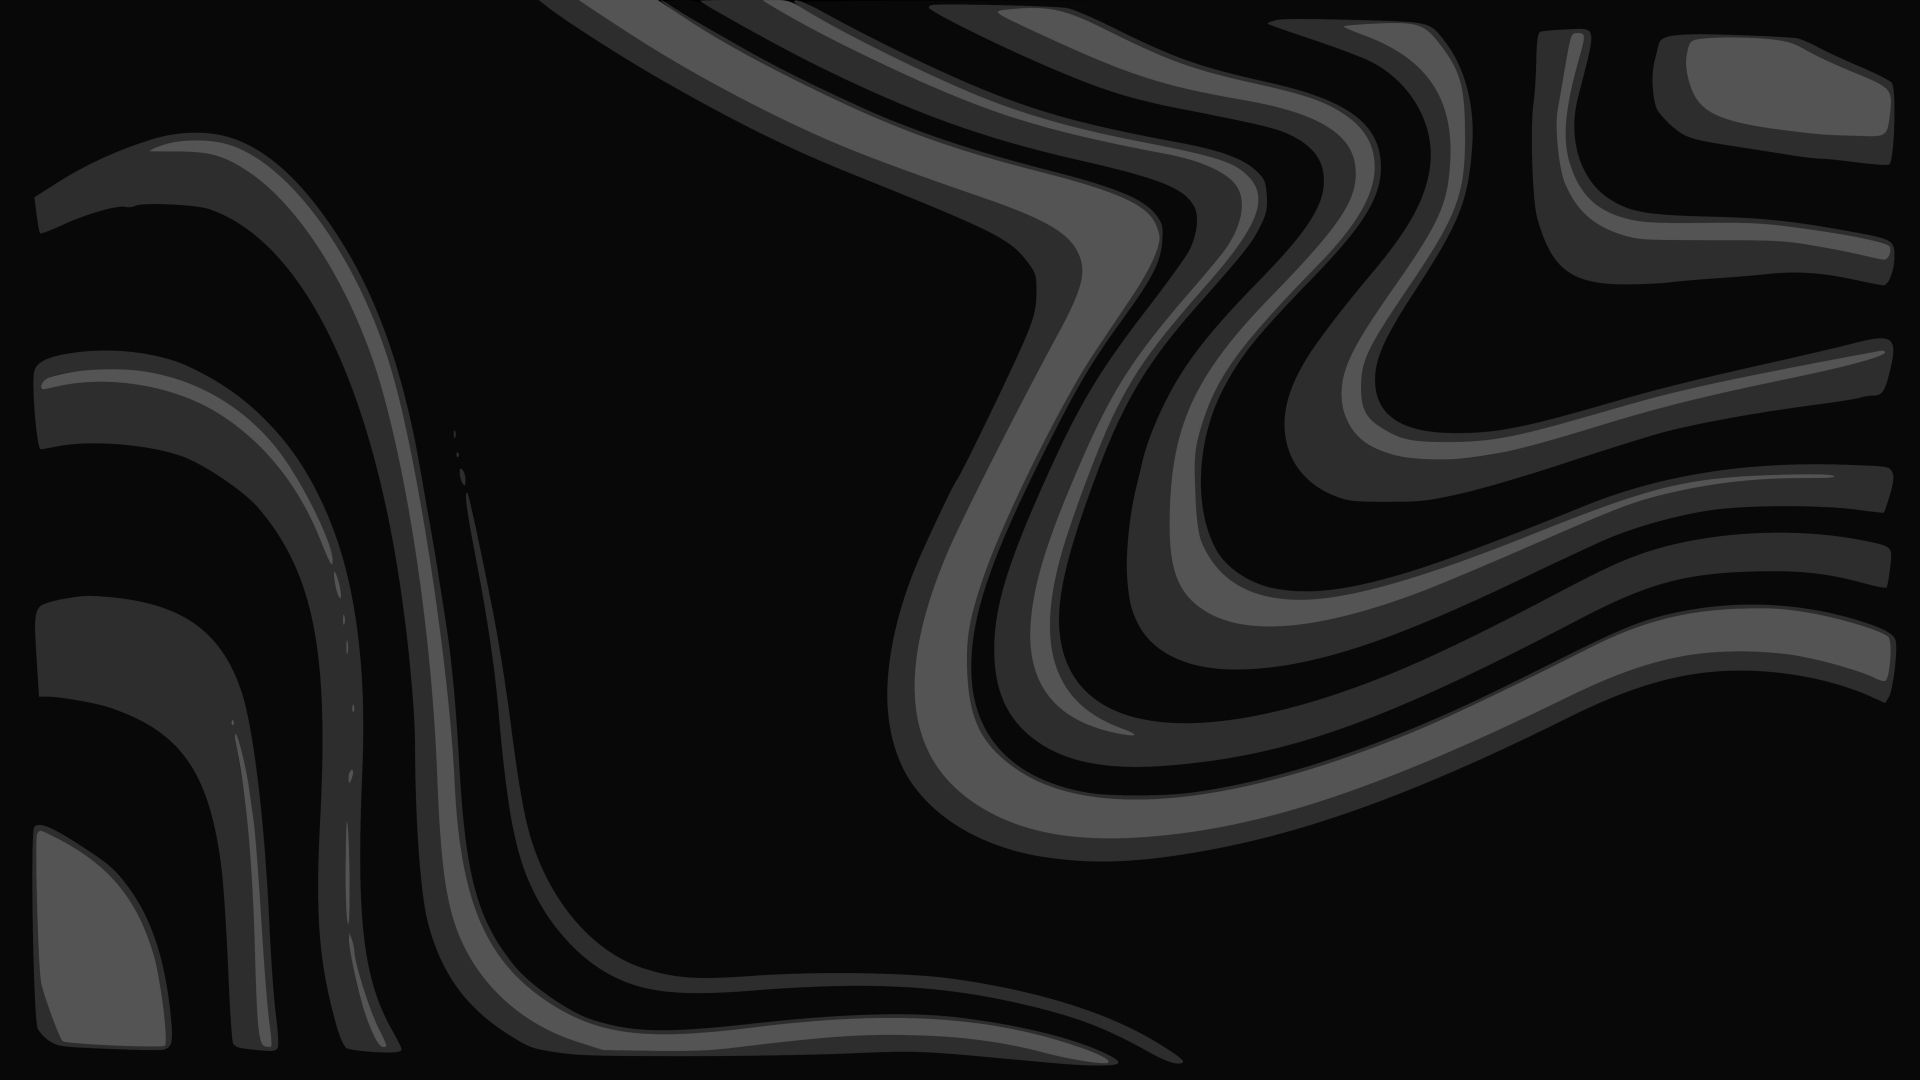 Abstract Wave Wavy Background Black Wavy Wallpaper Texture 3d Rendering  Paper Cut Wave Pattern Black Backdrop For Background Hd Photography Photo  Background Image And Wallpaper for Free Download